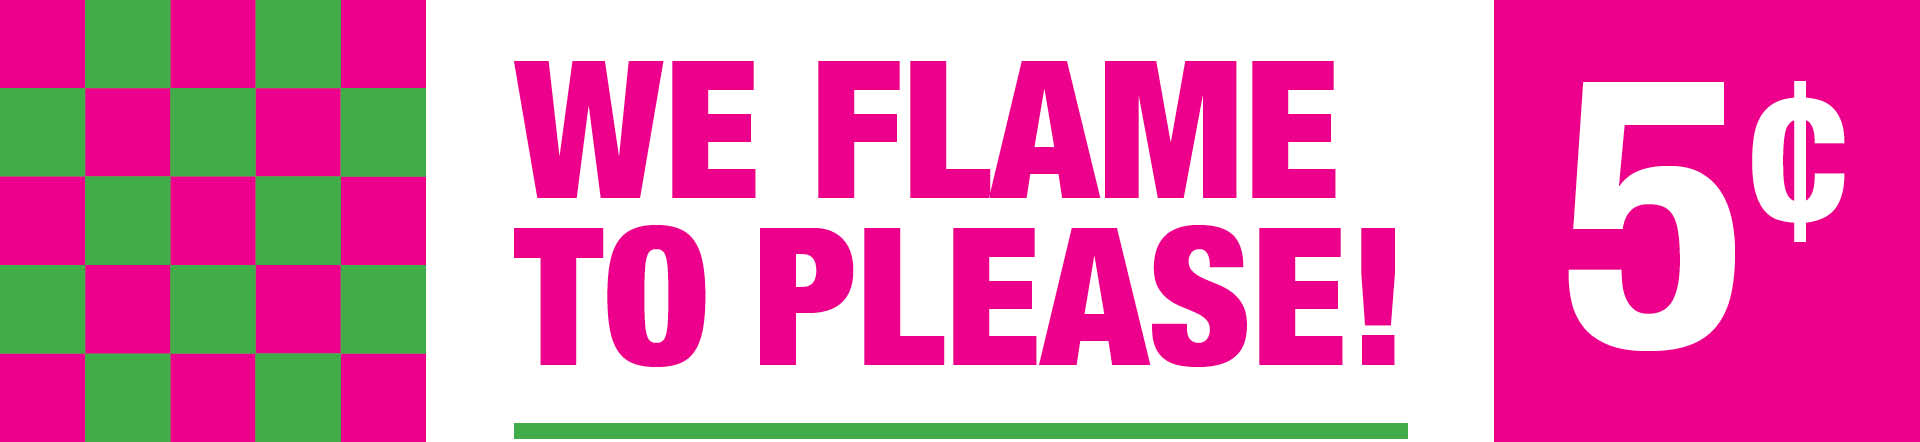 We Flame to Please!